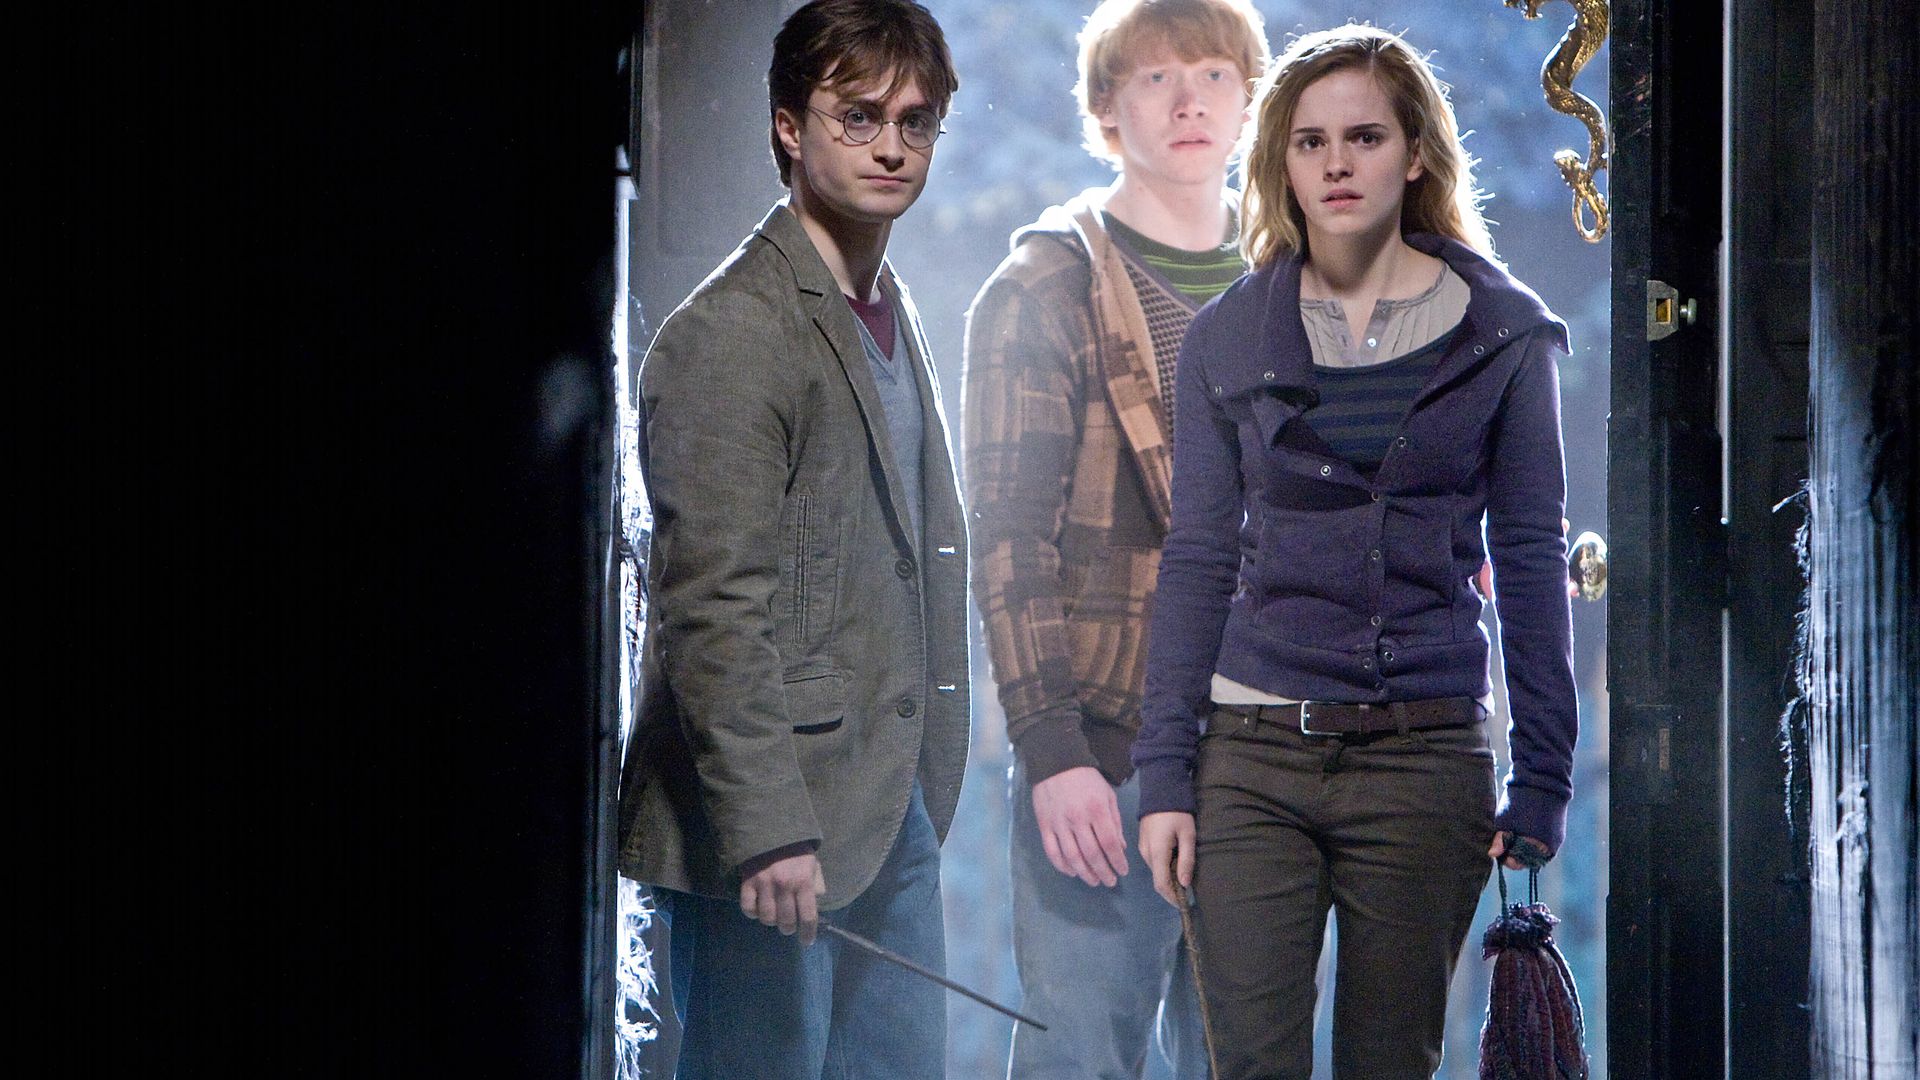 Emma Watson, Rupert Grint and Daniel Radcliffe in Harry Potter & The Deathly Hallows Part 1